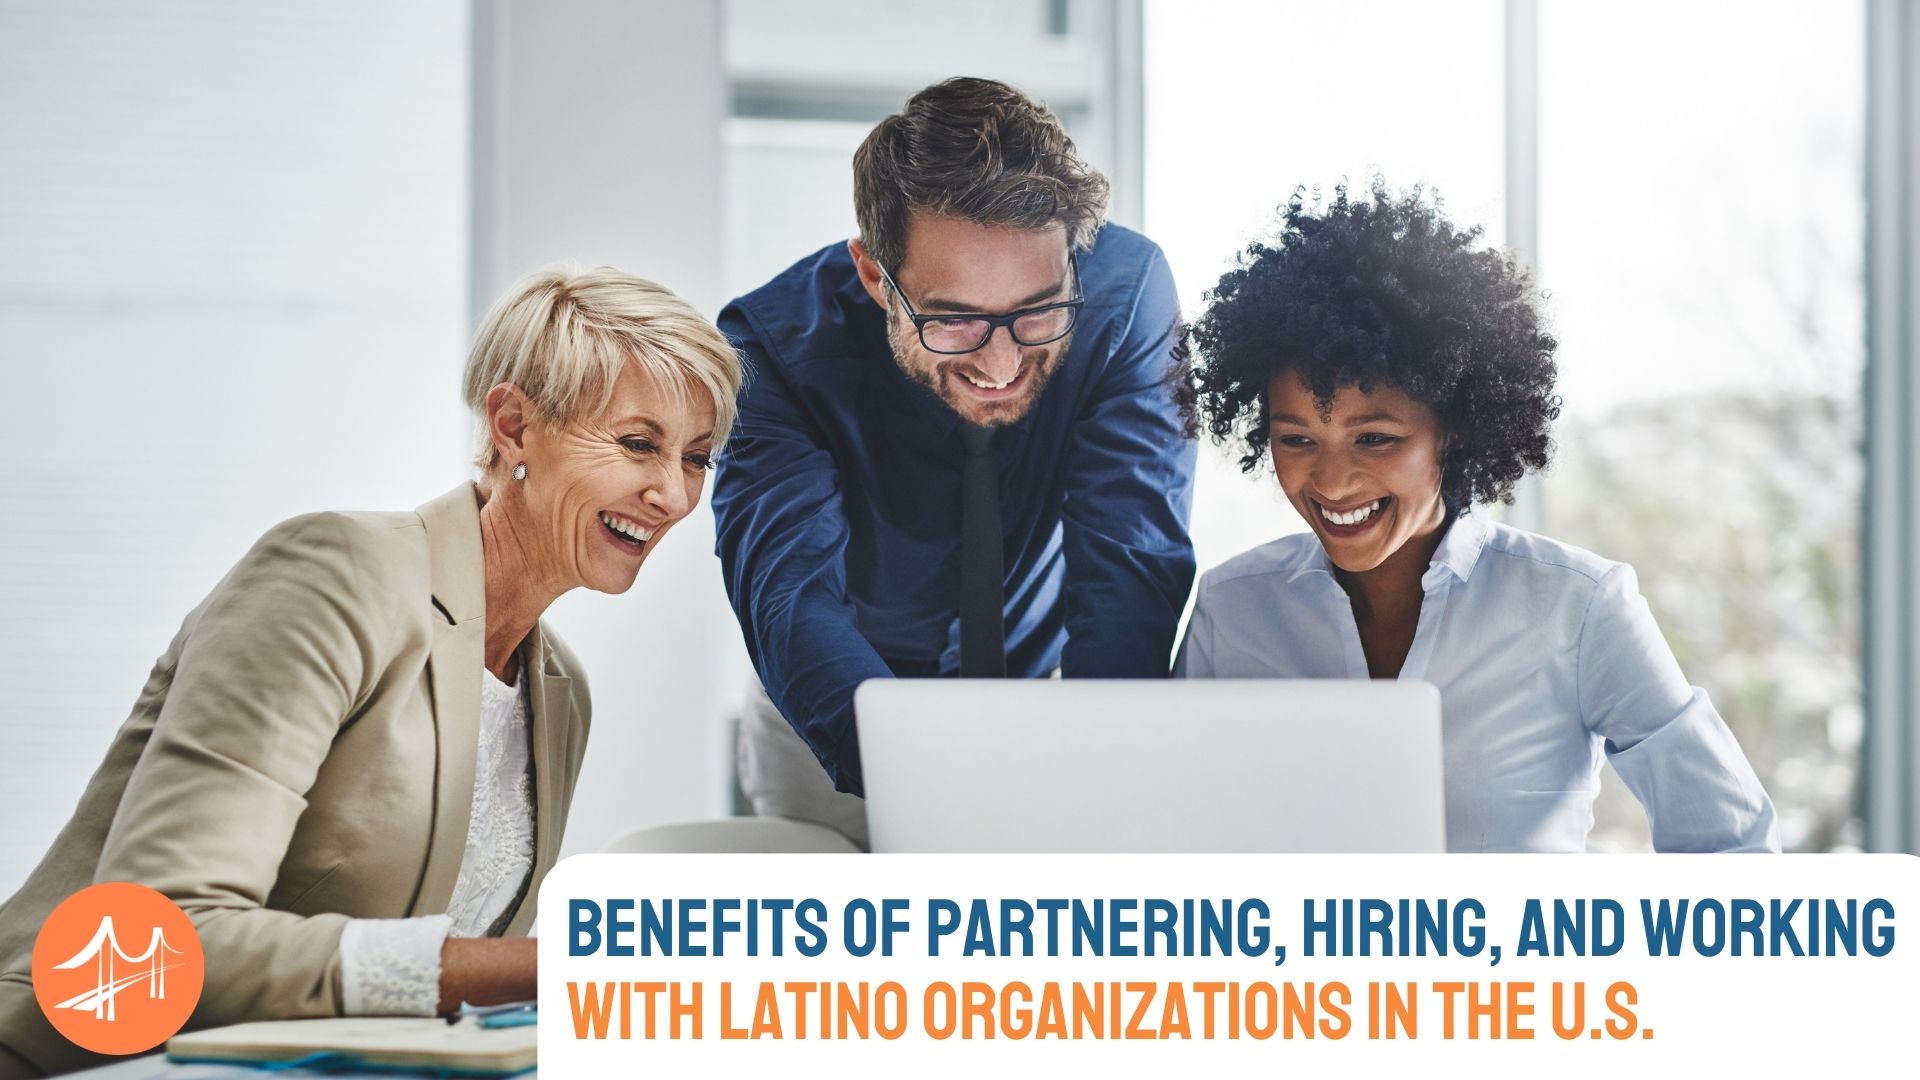 The Benefits of Partnering, Hiring, and Working with Latino Organizations in the U.S.